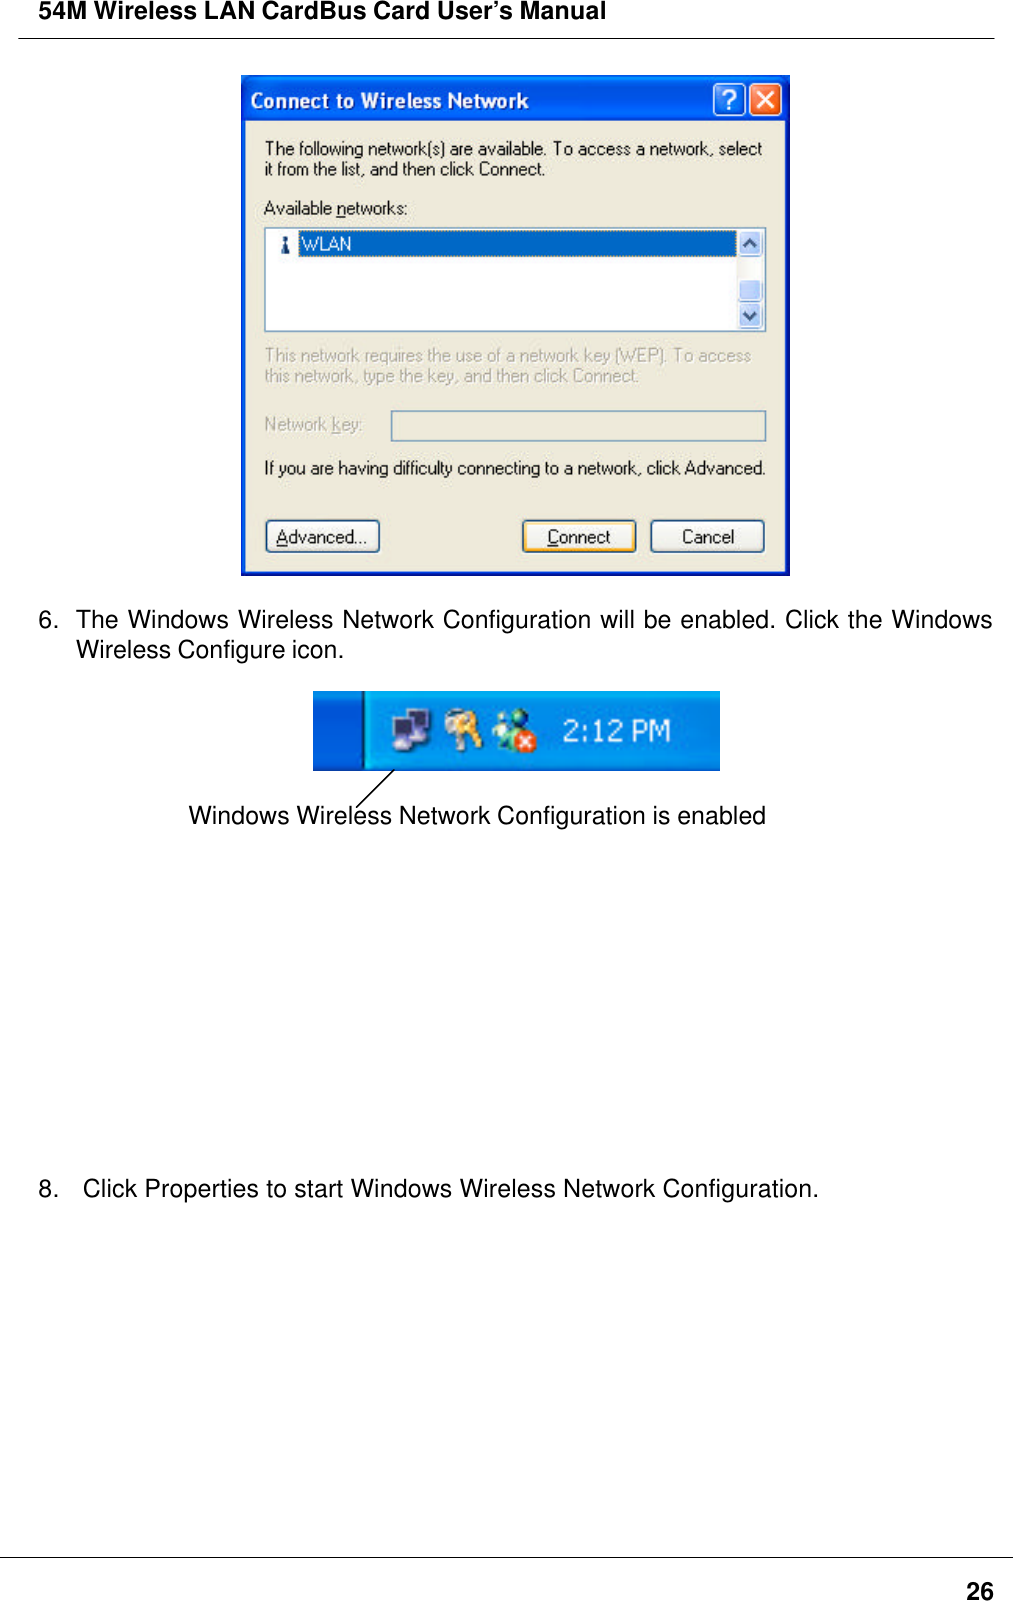 54M Wireless LAN CardBus Card User’s Manual266. The Windows Wireless Network Configuration will be enabled. Click the WindowsWireless Configure icon.Windows Wireless Network Configuration is enabled8.  Click Properties to start Windows Wireless Network Configuration.